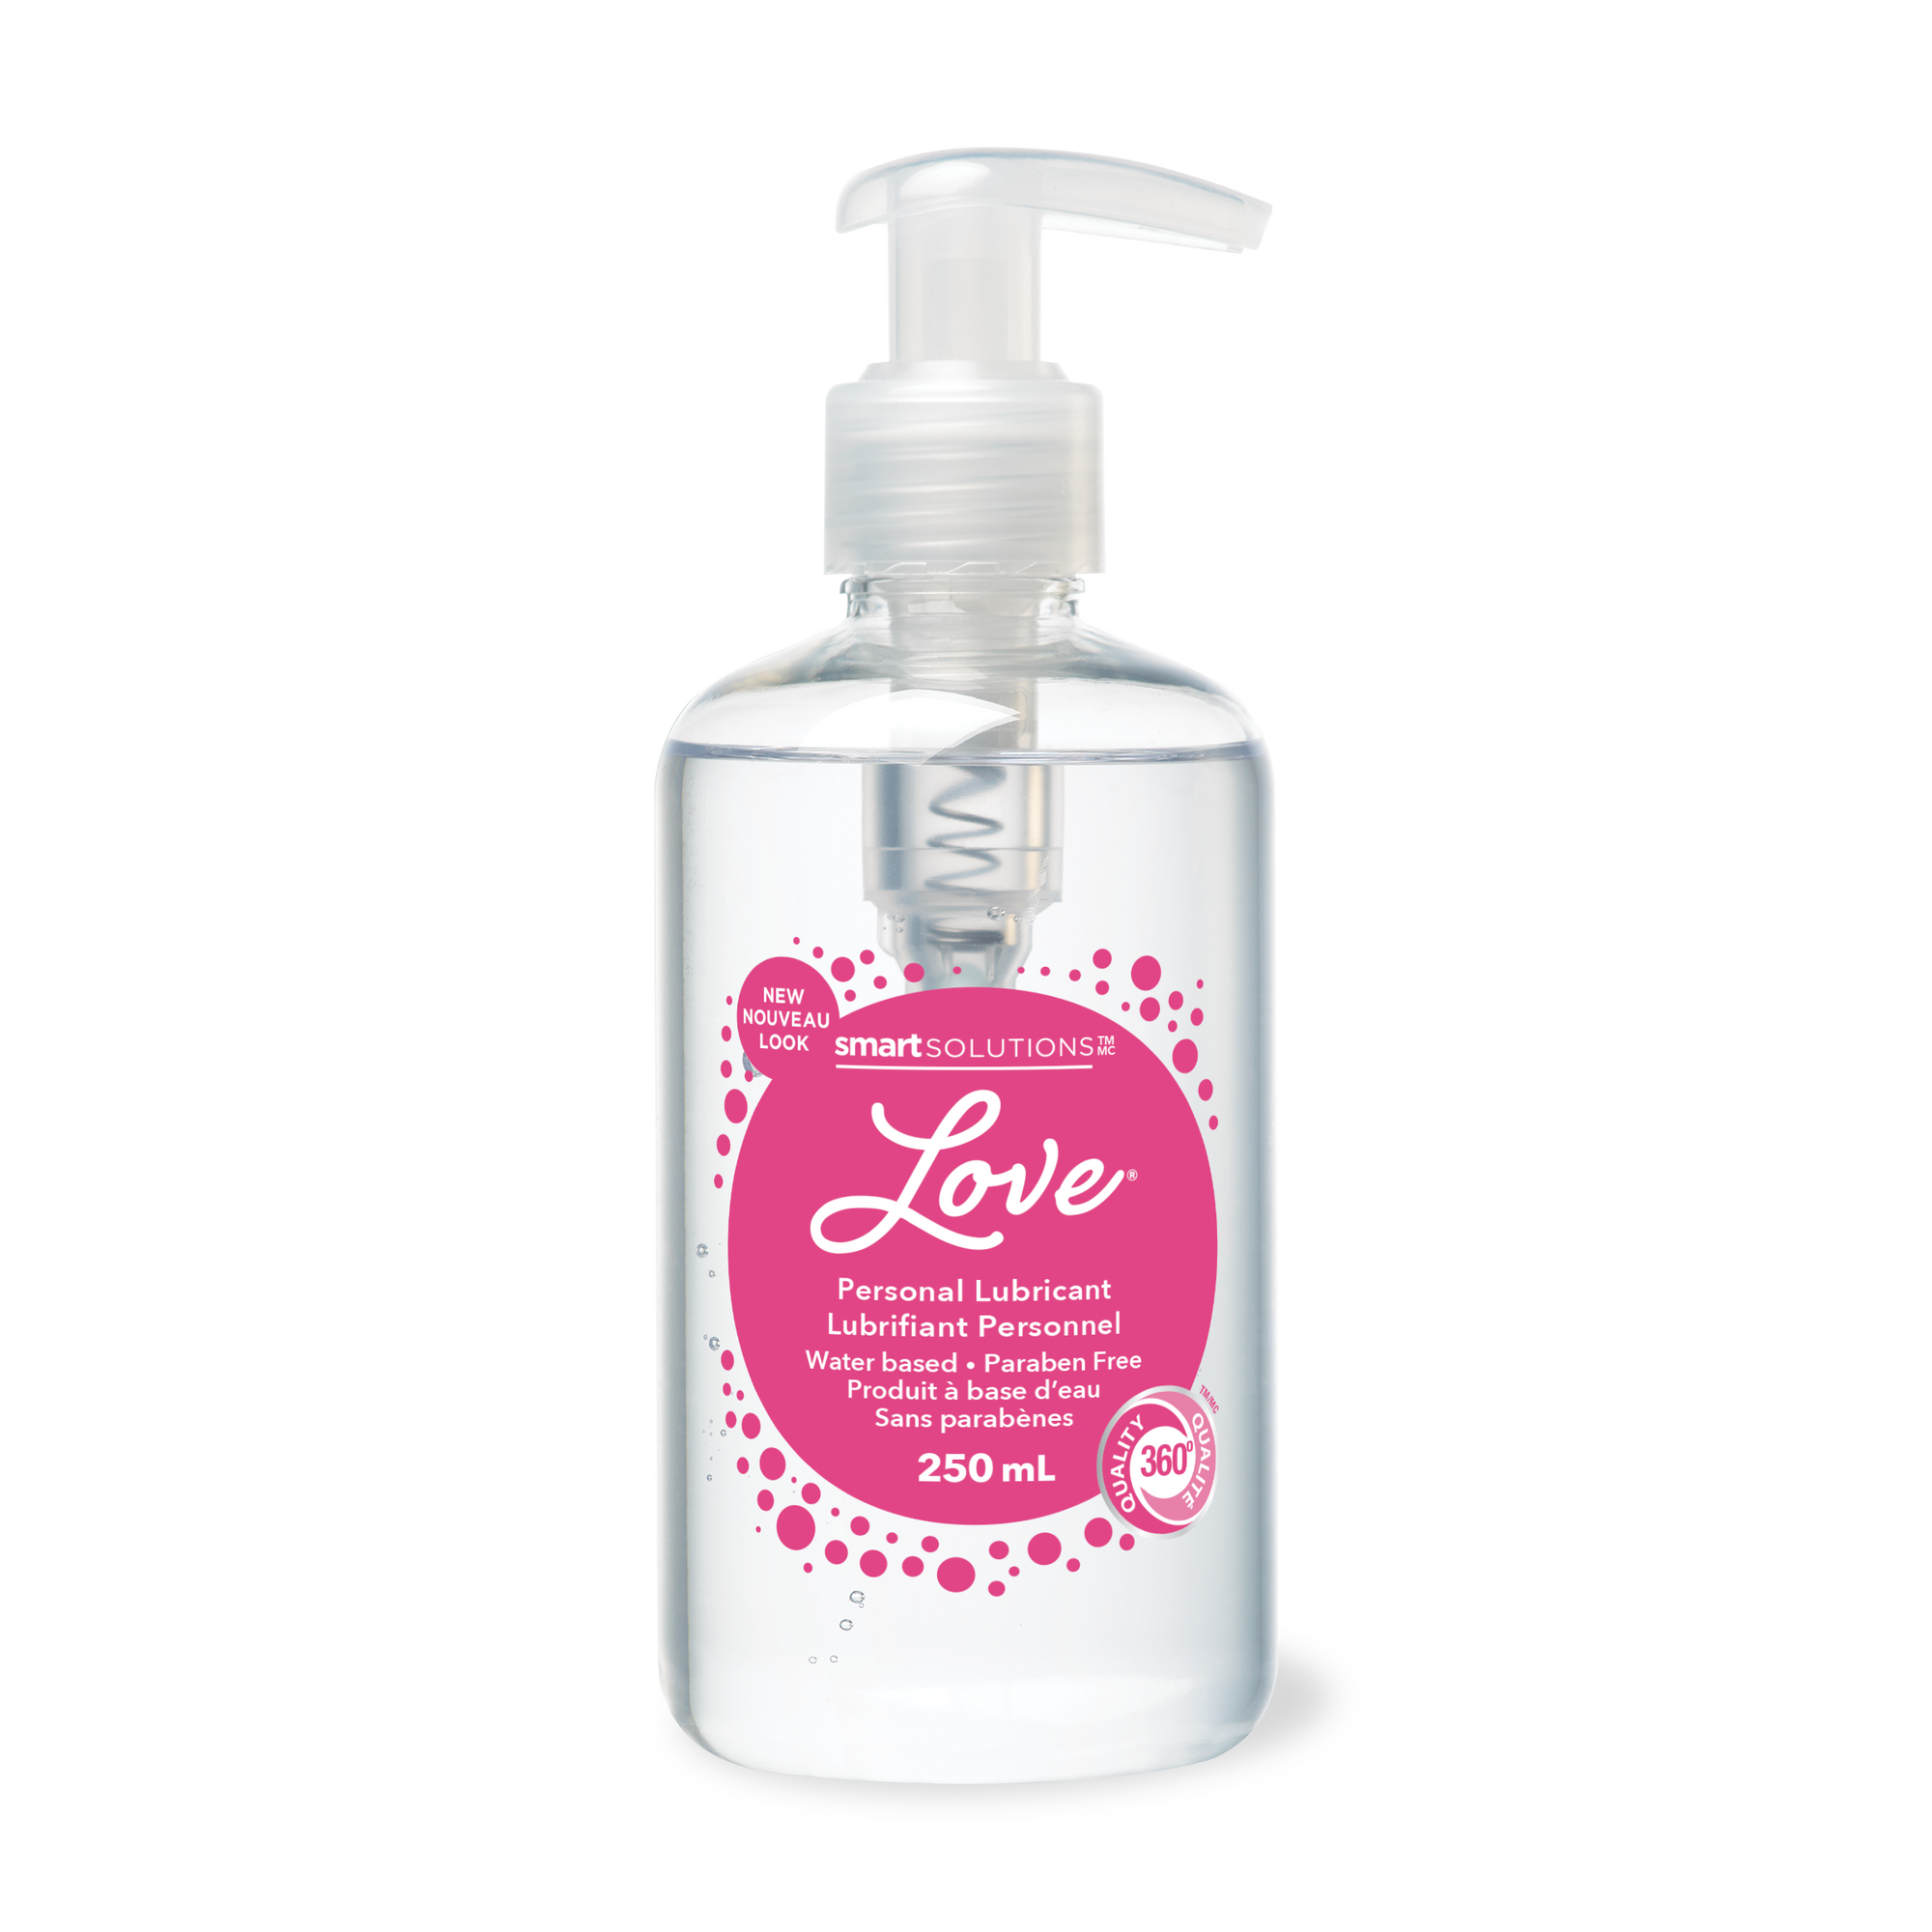 Smart Solutions Love Personal Lubricant 250ml Pump